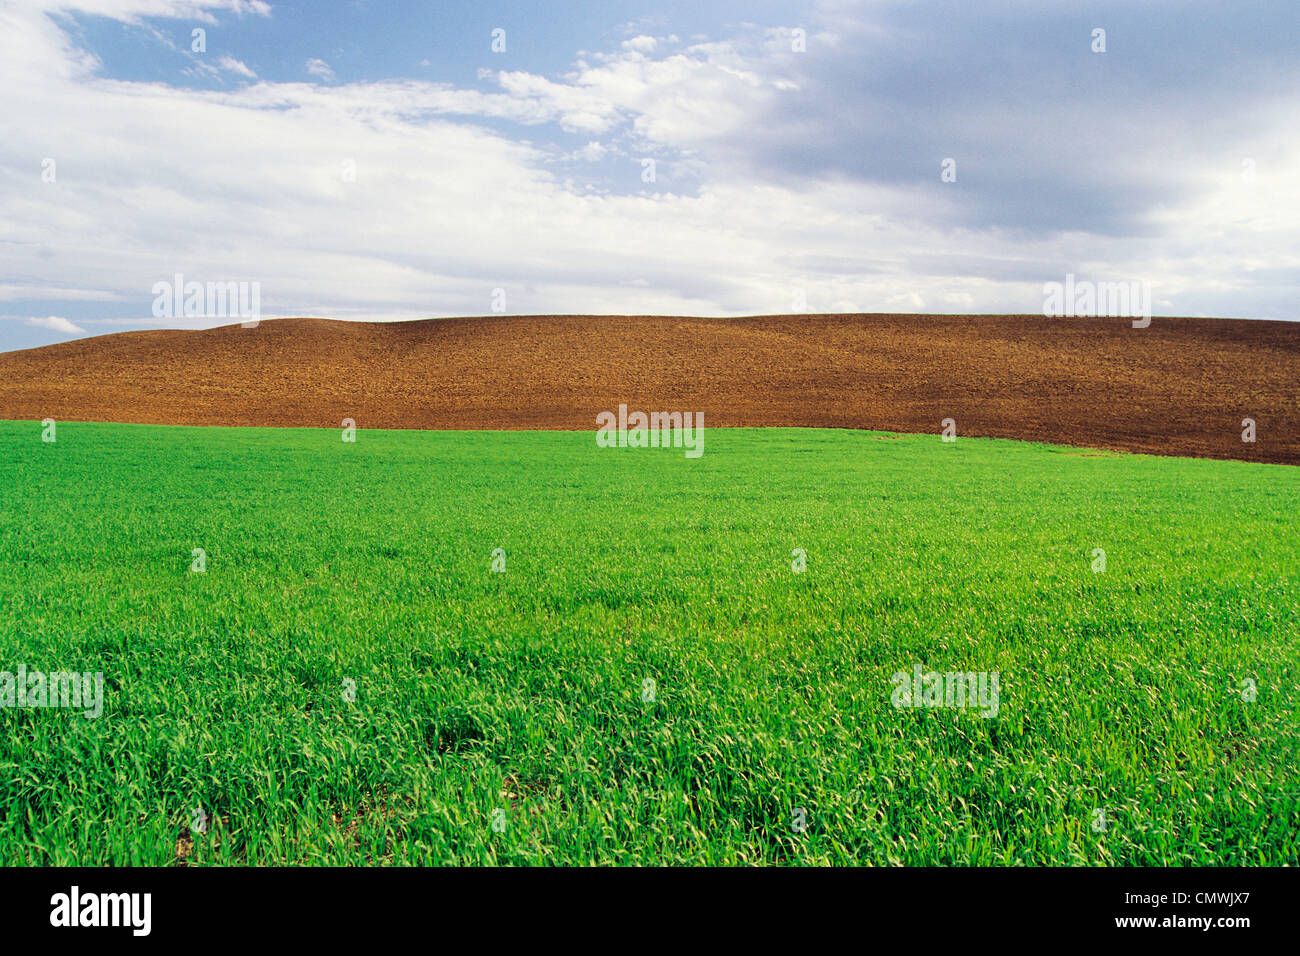 Farmland with Early Growth Grain in the foreground and Newly Seeded Field in the background, Tiger Hills, Manitoba Stock Photo